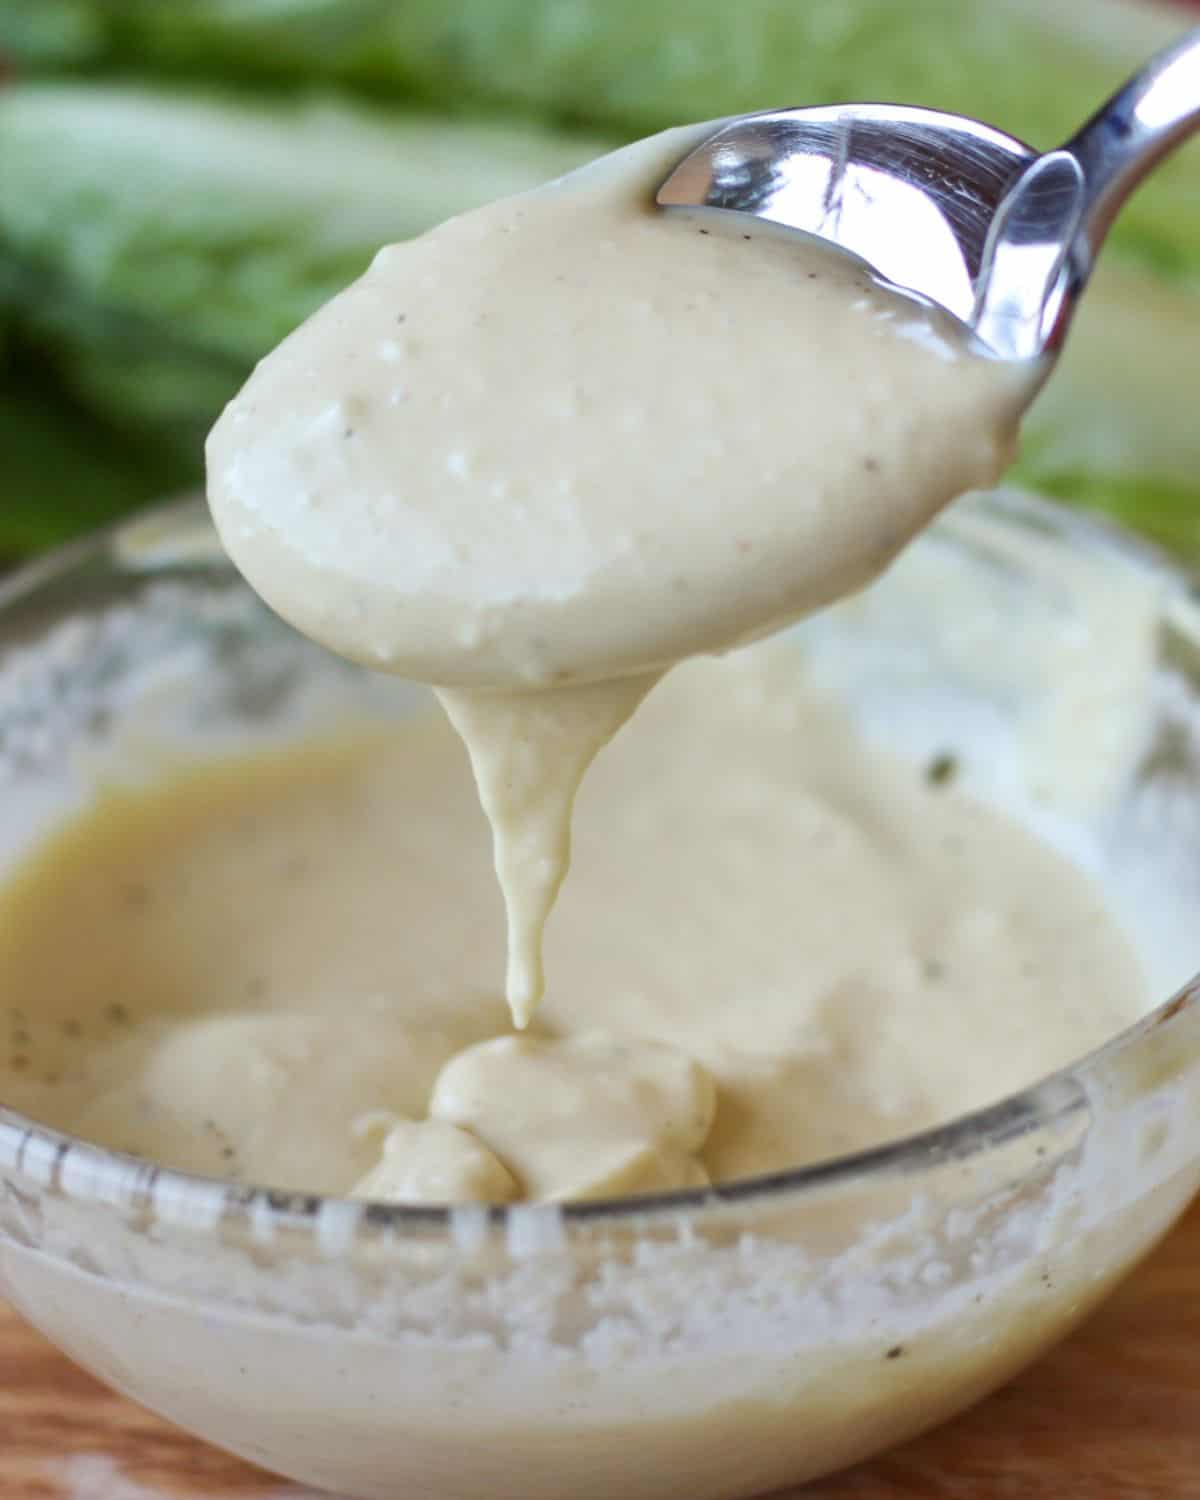 A glass bowl with creamy sauce on a wooden surface. The spoon filled with a sauce is dripping over the bowl. There is green lettuce in the background.